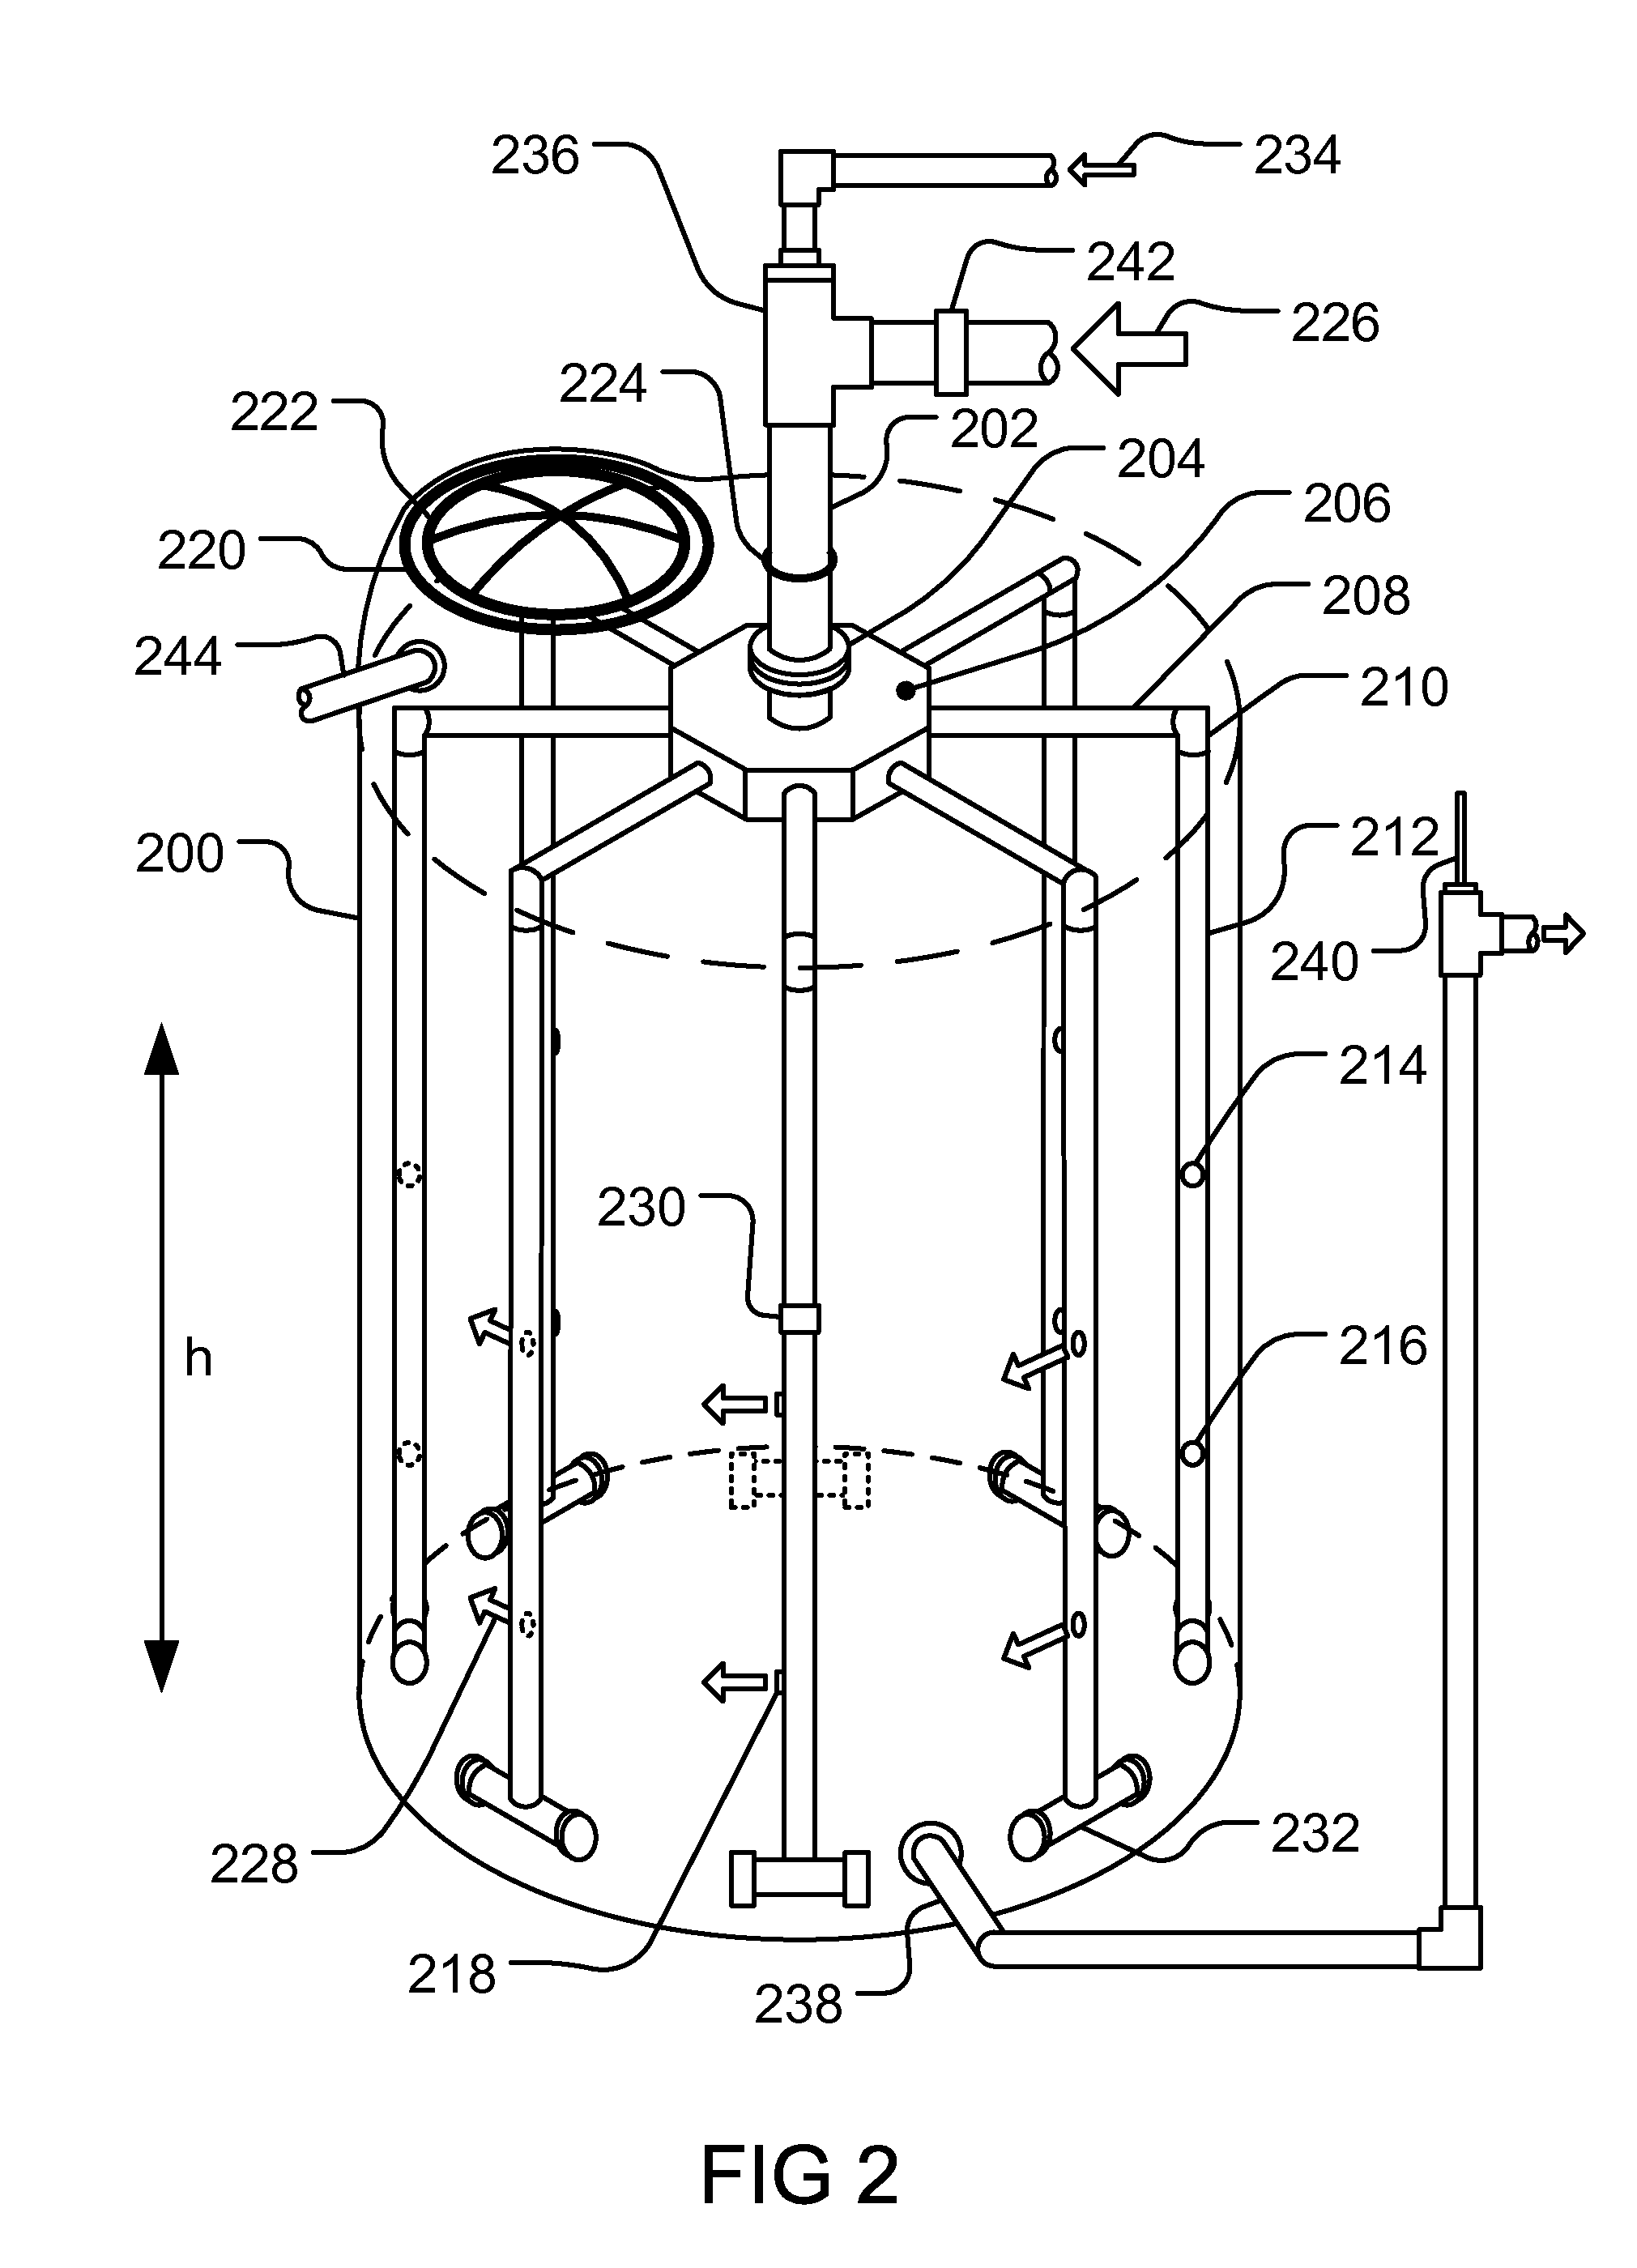 System and Method for Fuel Generation from Algae